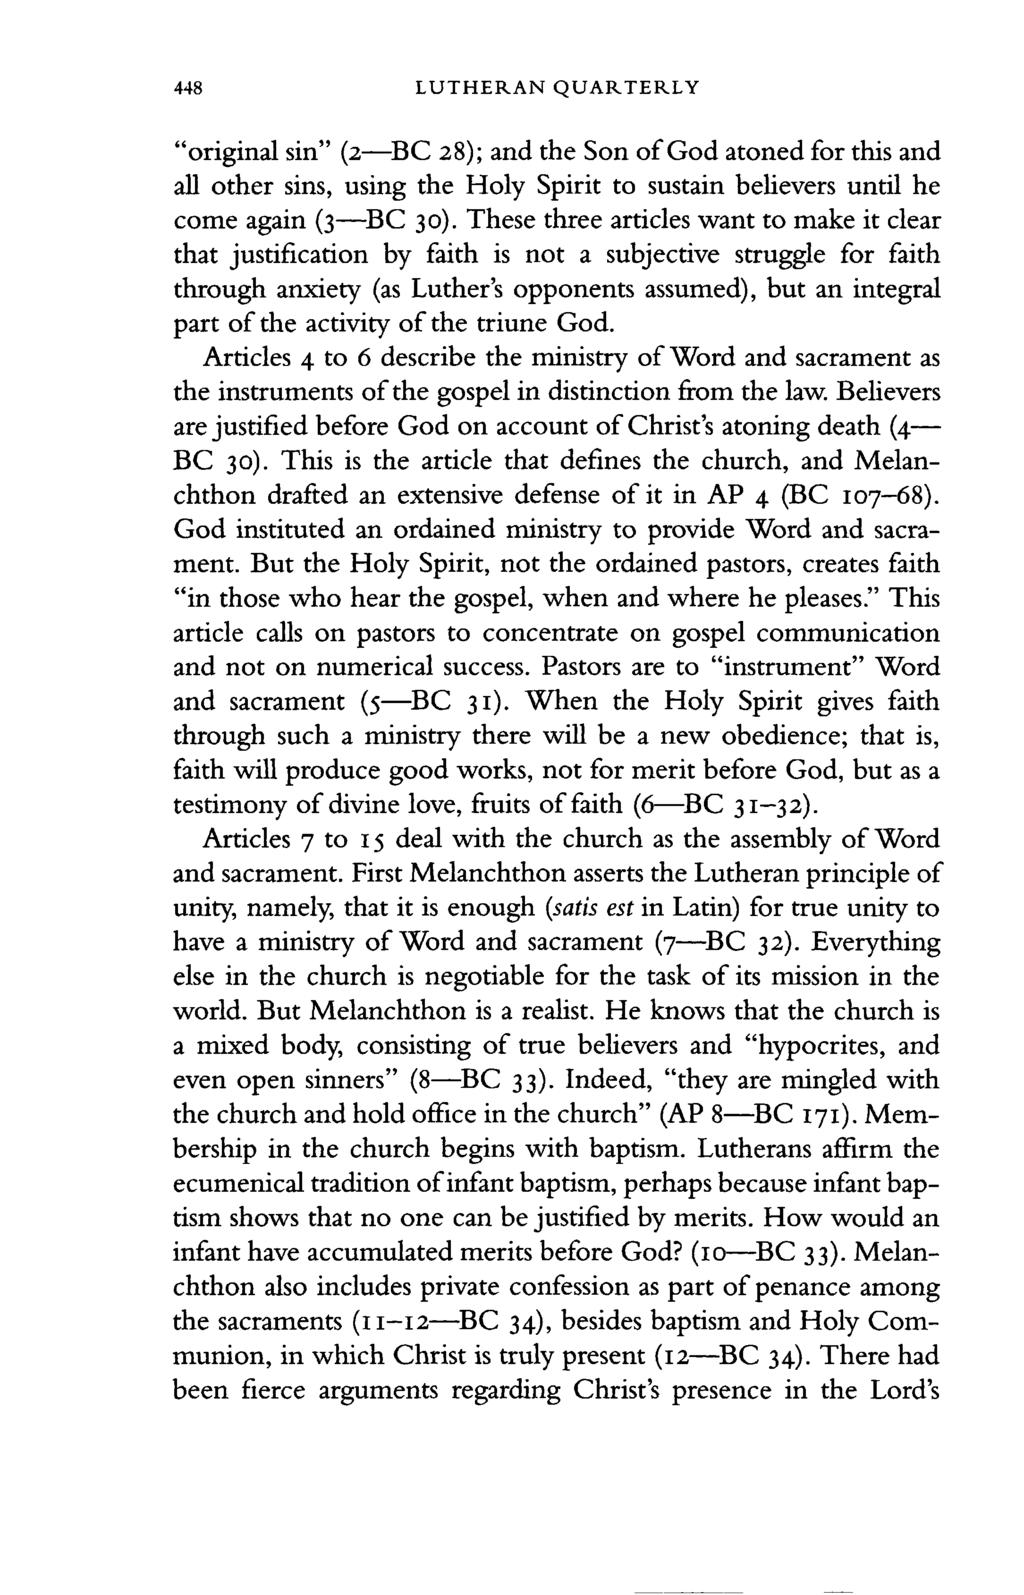 448 LUTHERAN QUARTERLY "original sin" (2 BC 28); and the Son of God atoned for this and all other sins, using the Holy Spirit to sustain believers until he come again (3 BC 30).